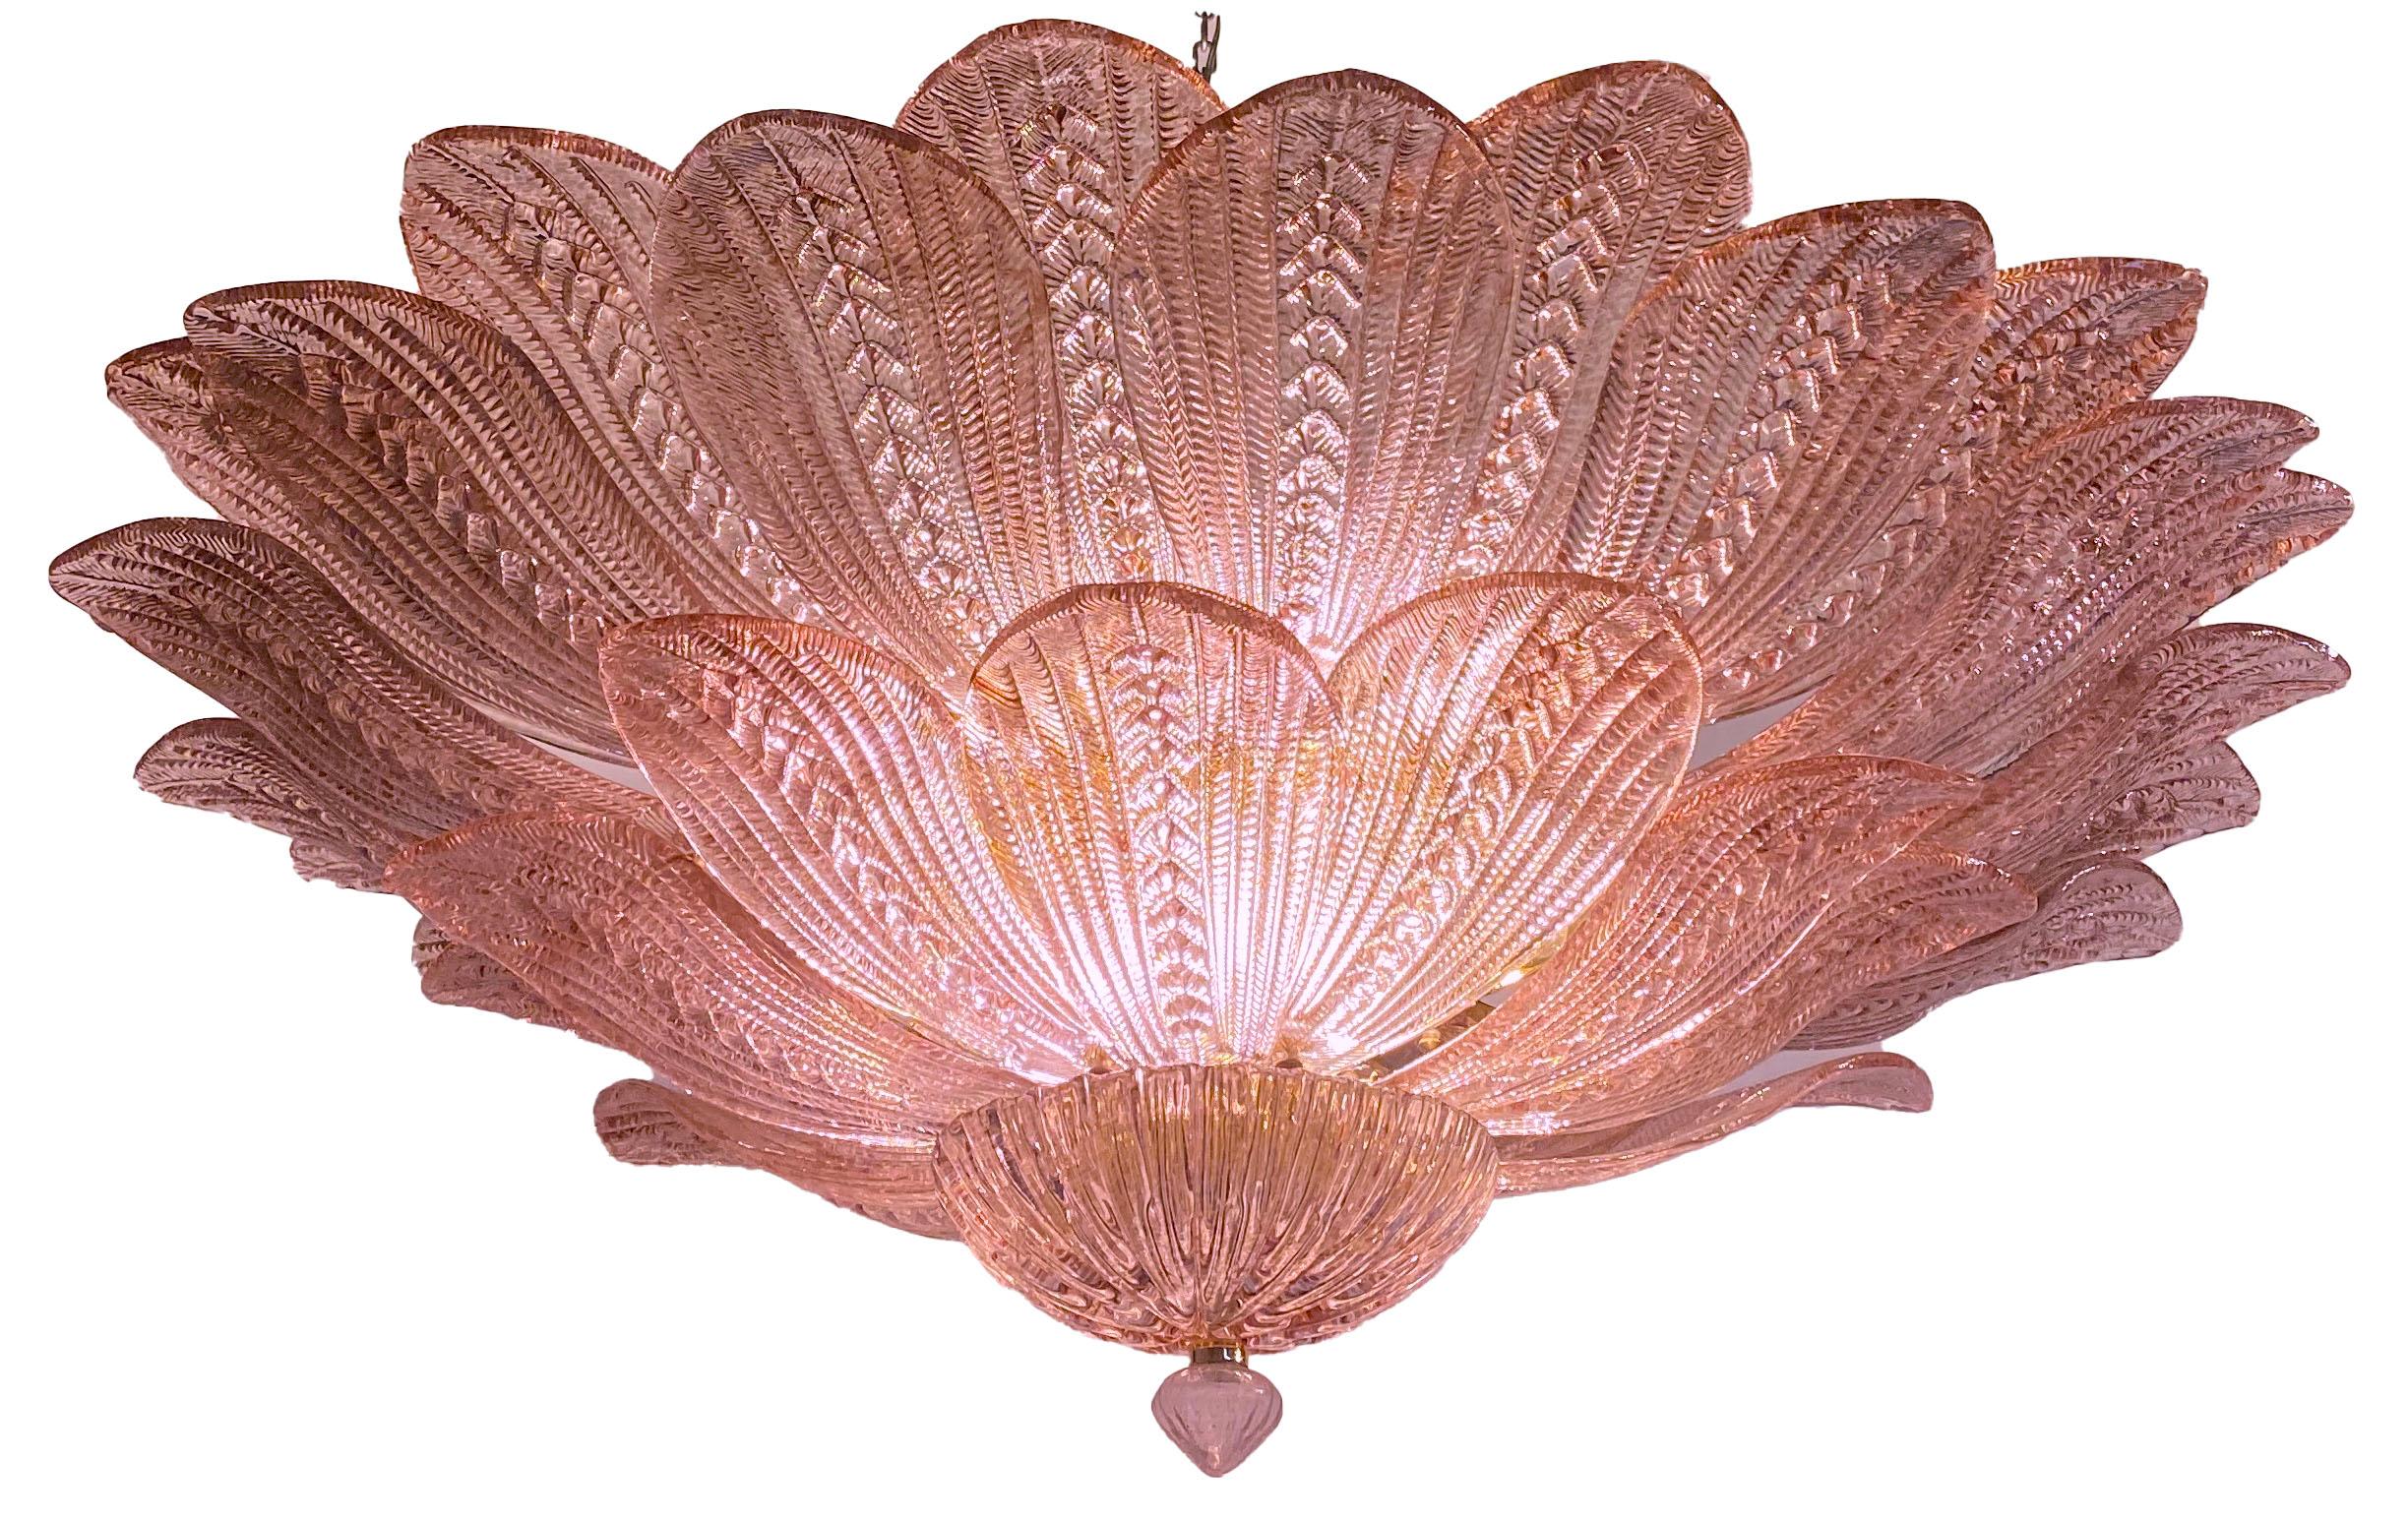  Graceful Pink Amethyst Murano Glass Leave Ceiling Light or Chandelier For Sale 7